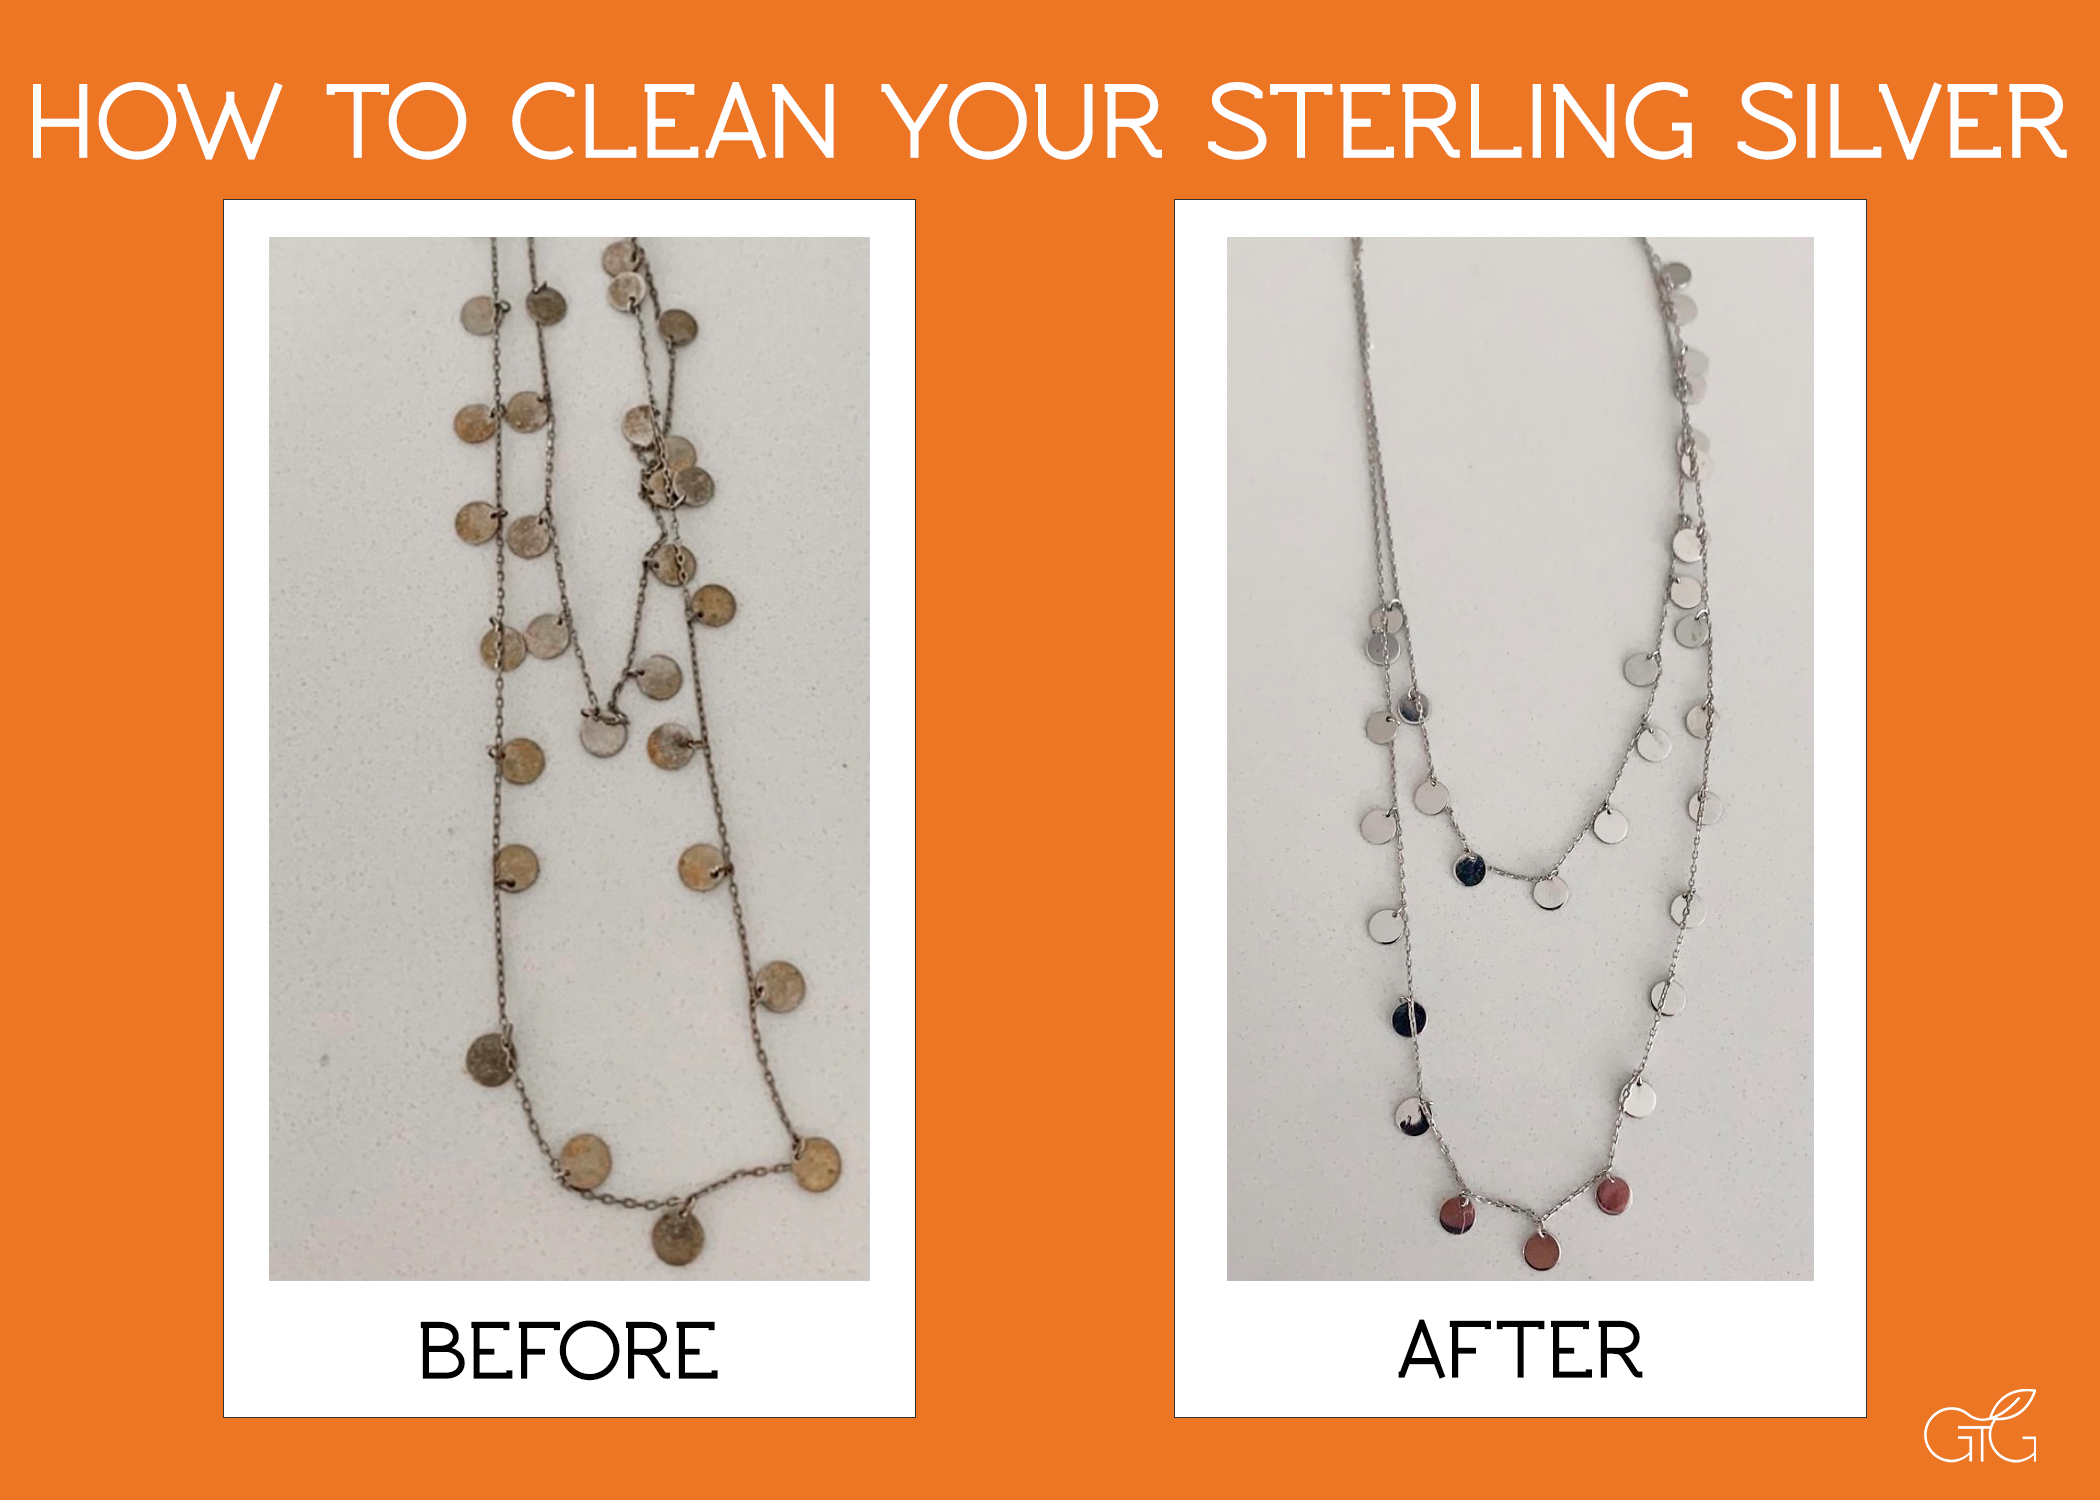 How to Clean Sterling Silver Necklaces